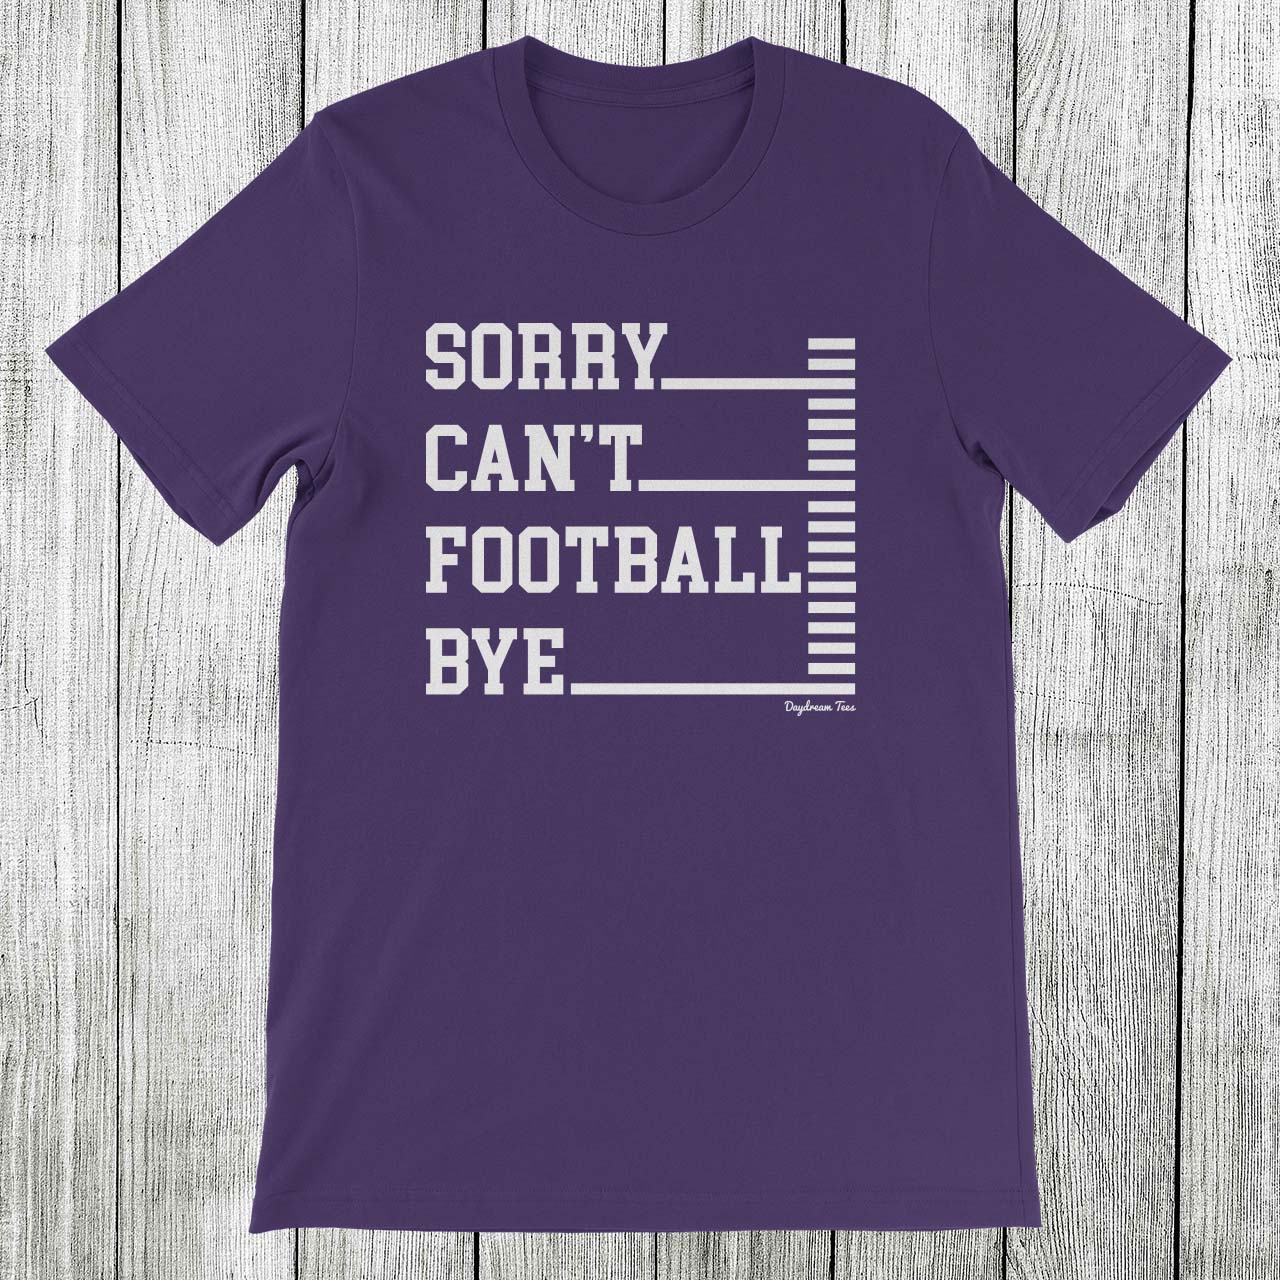 Daydream Tees Sorry Can't Football Bye